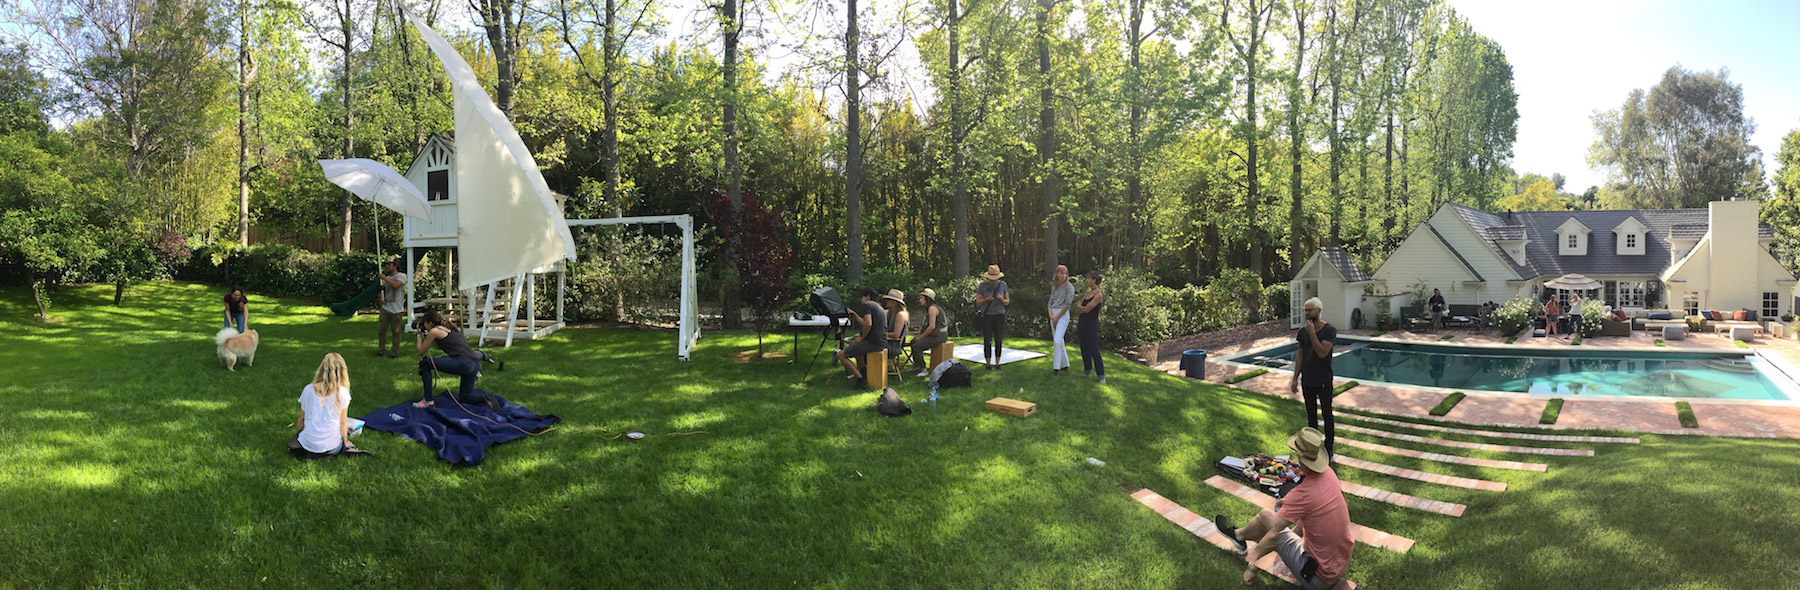 behind-the-scenes-dog-photographer-for-natural-balance-dog-food-commercial-campaign-panoramic.jpg